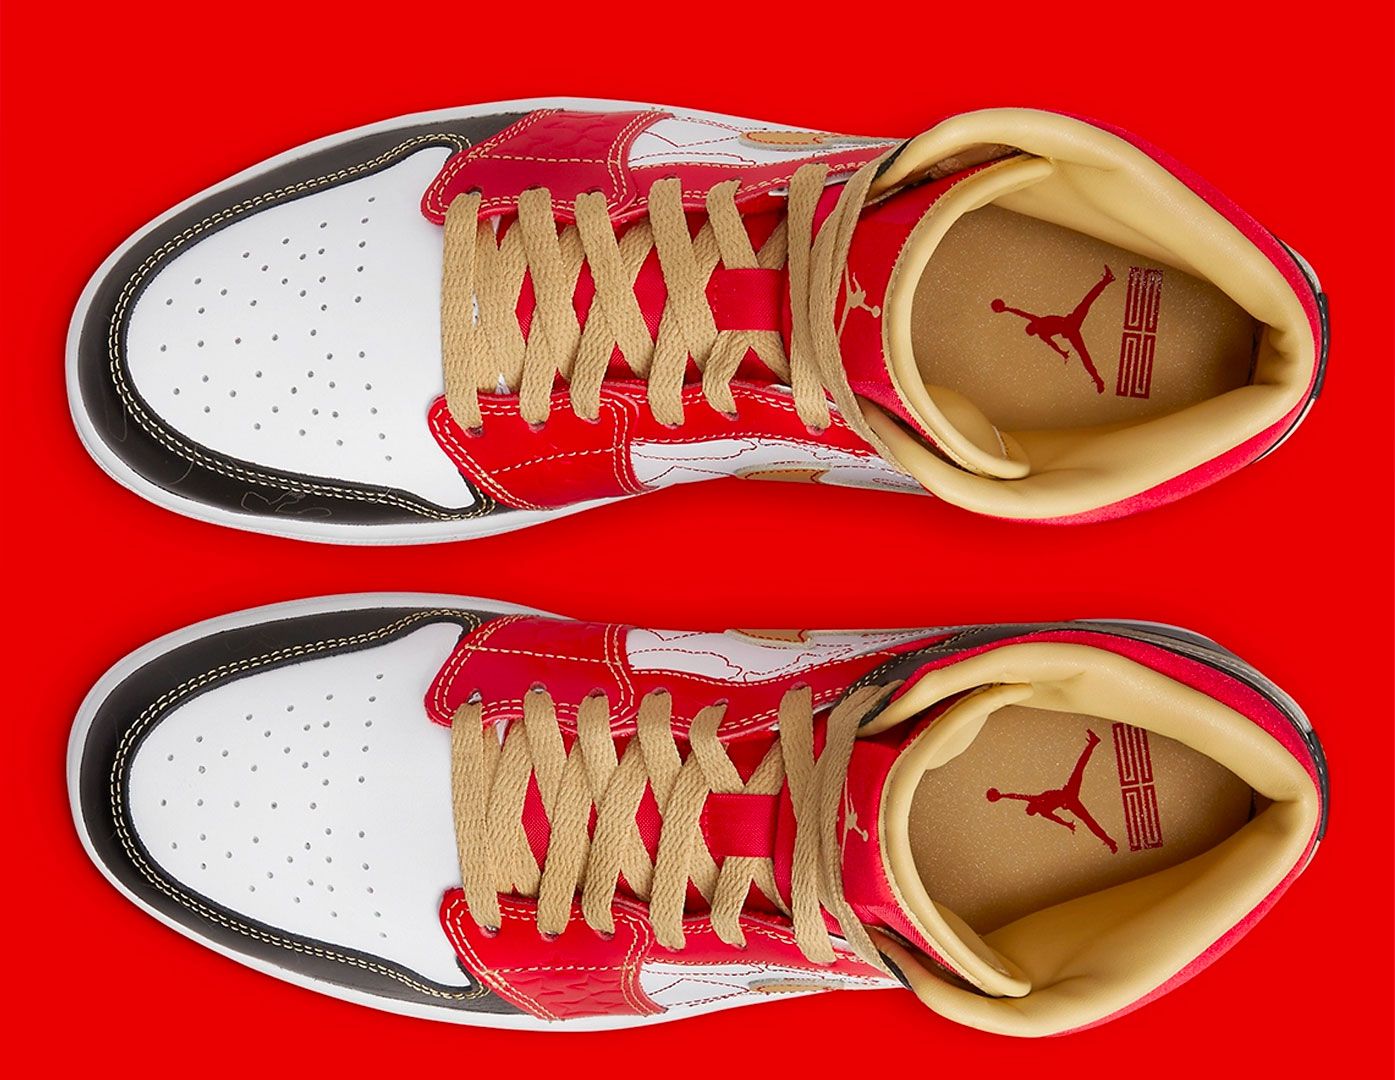 Air Jordan 1 Mid XQ product image of a pair of white, red, and black sneakers with gold accents.